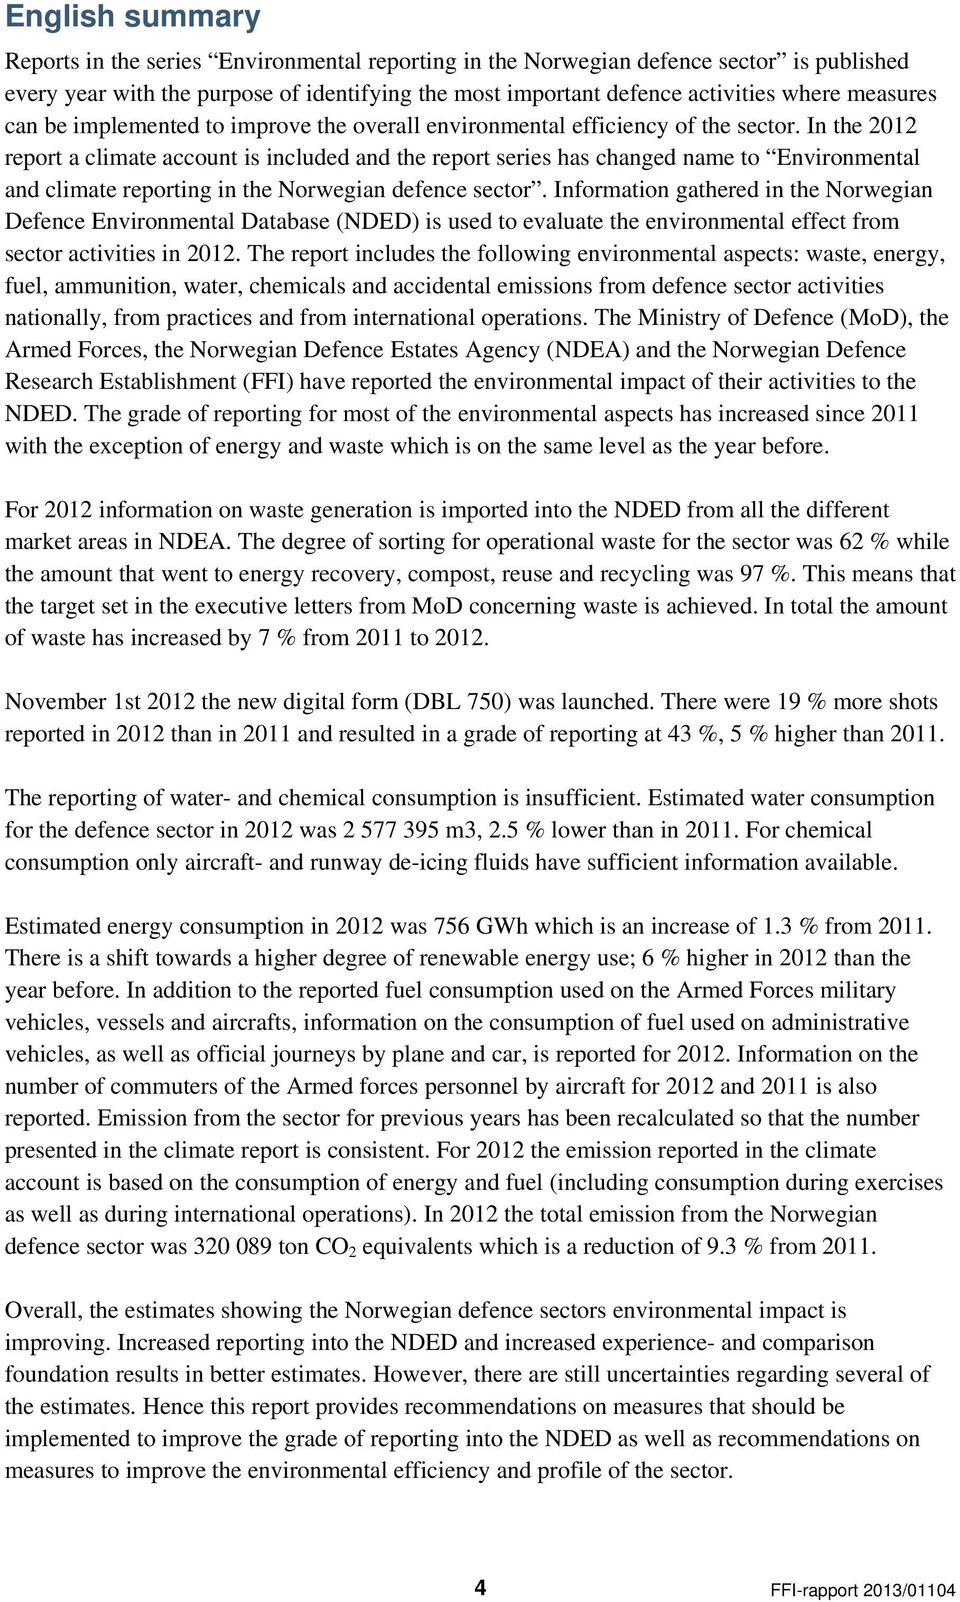 In the 2012 report a climate account is included and the report series has changed name to Environmental and climate reporting in the Norwegian defence sector.